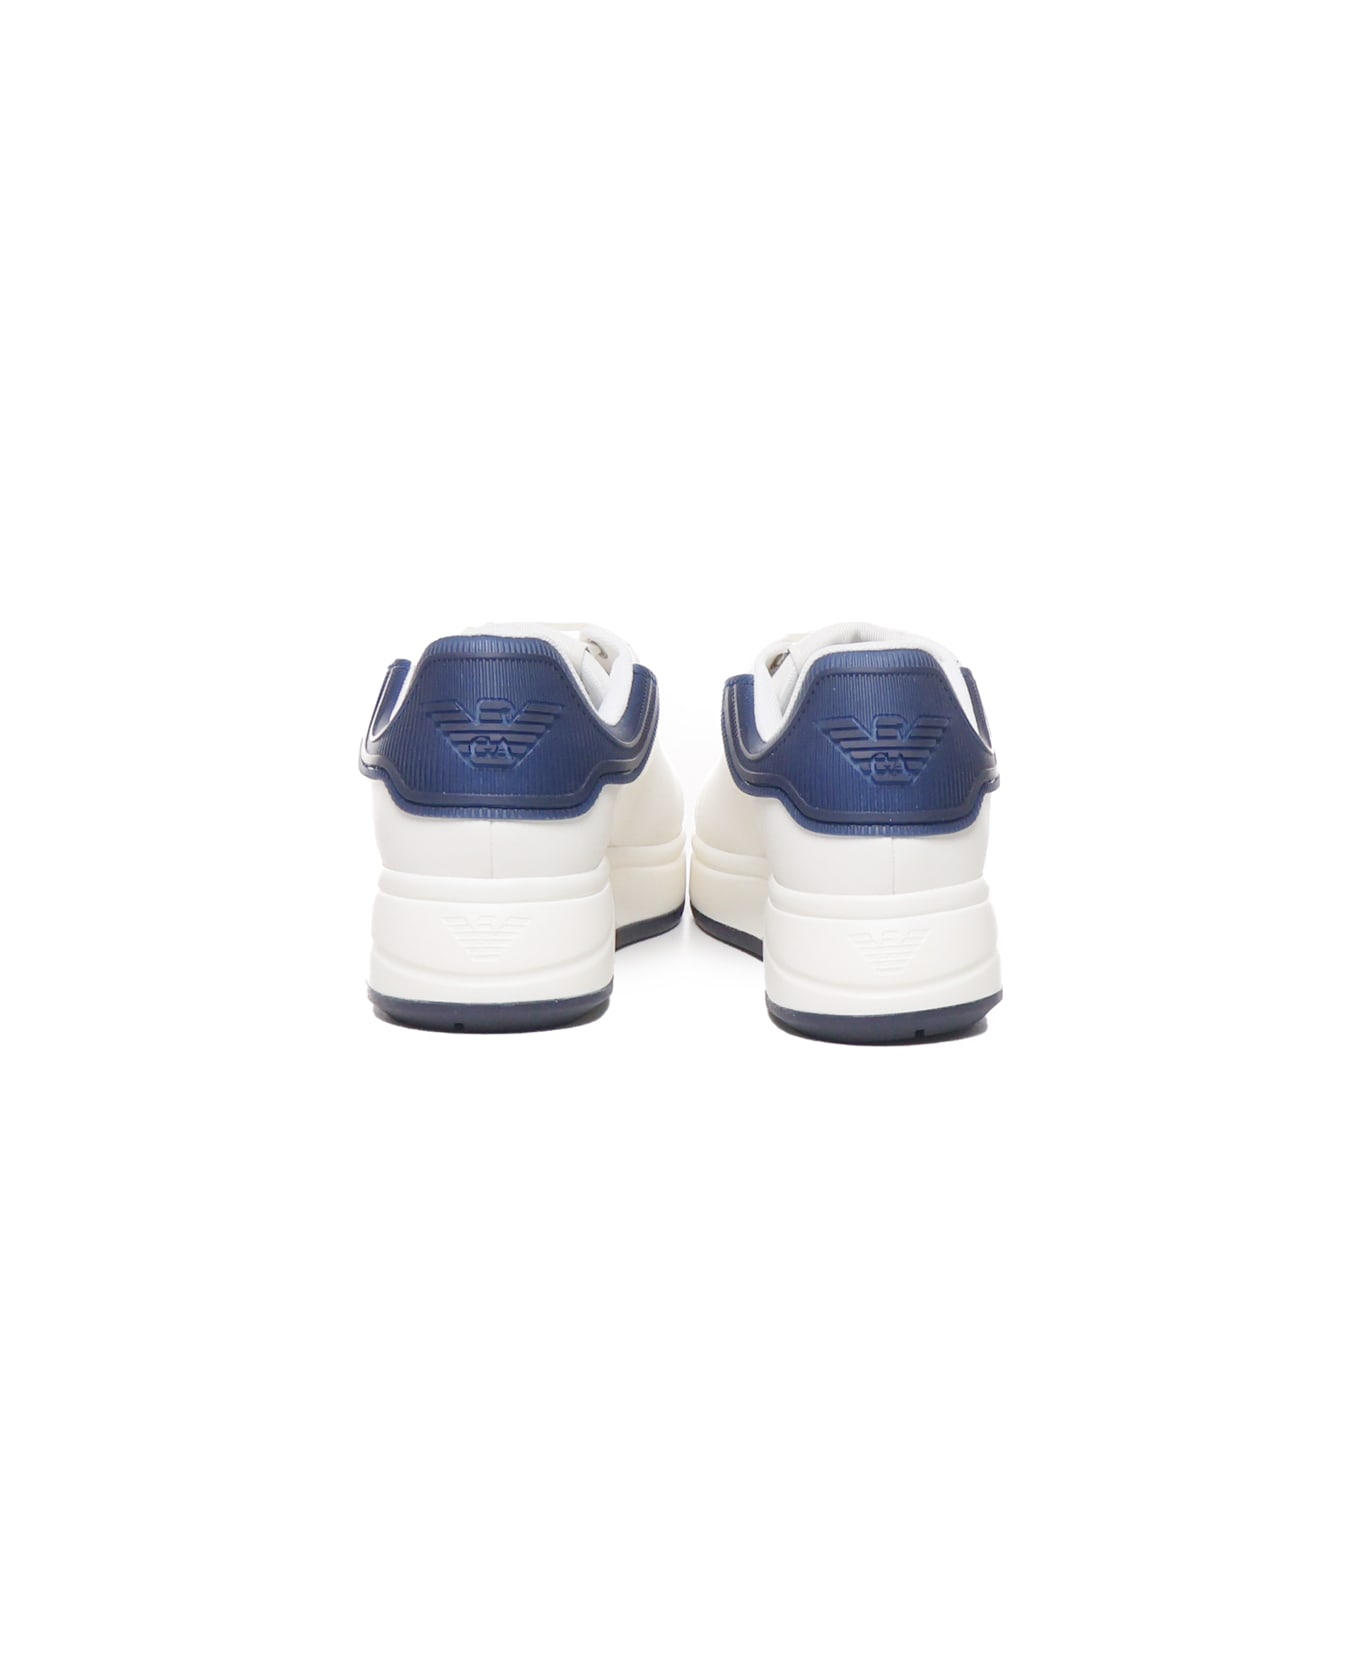 Emporio Armani Sneakers With Contrasting Rivet - White, blue